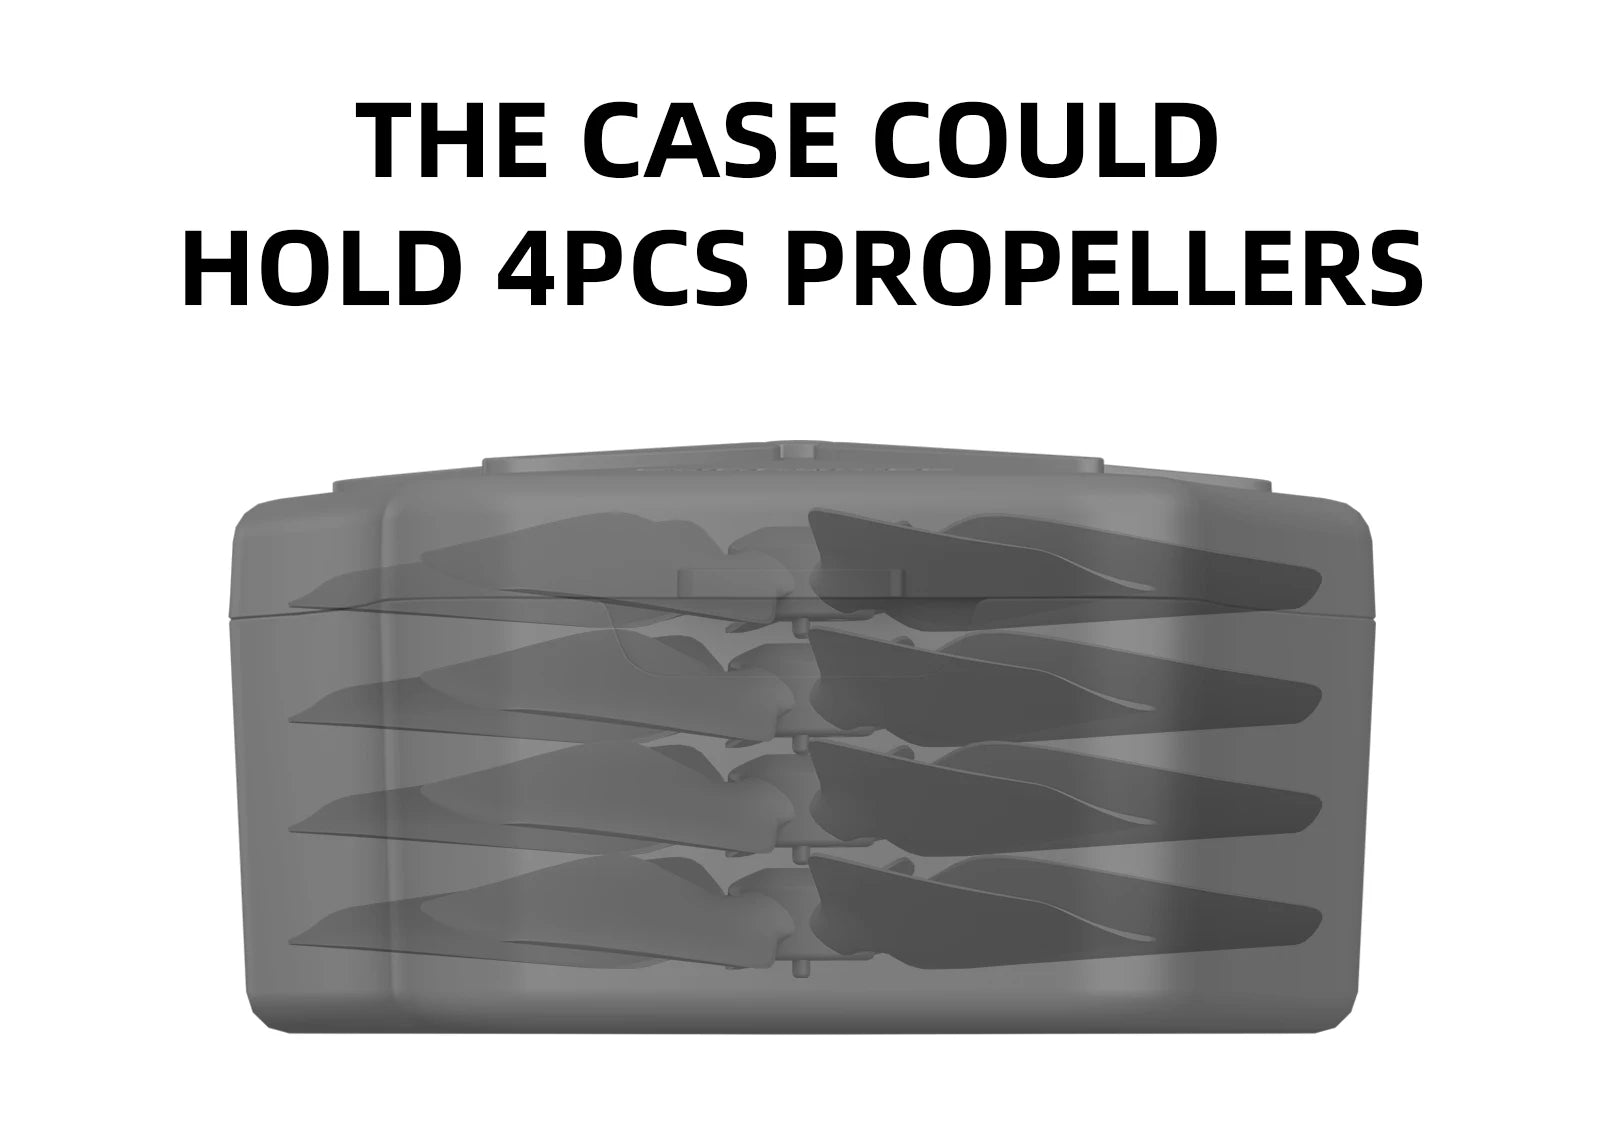 CASE COULD HOLD 4PCS PROPELLERS